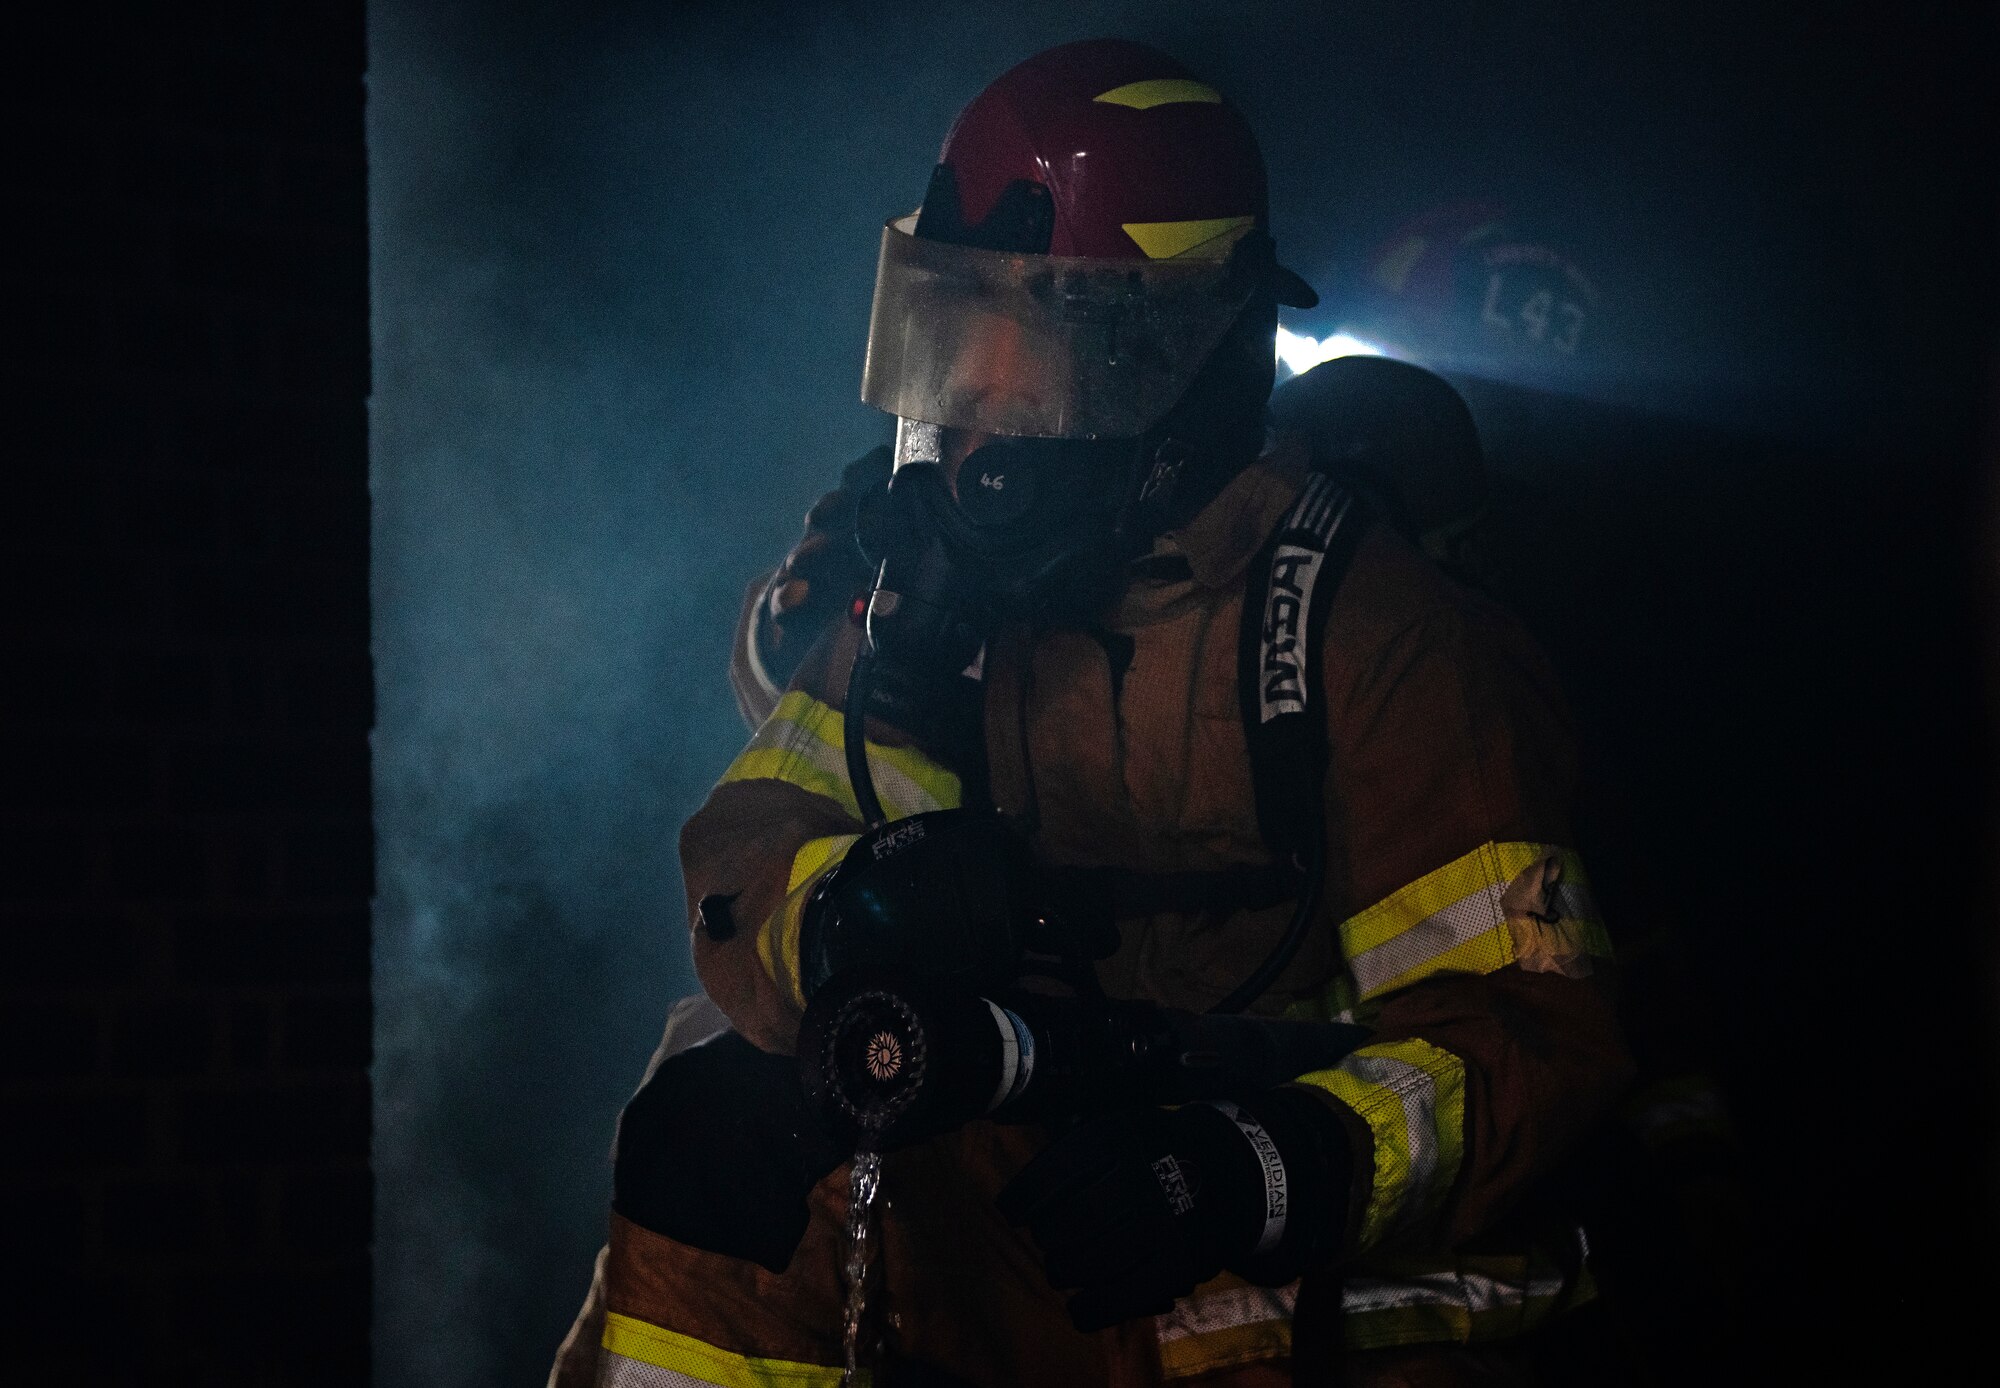 A U.S. Air Force firefighter assigned to the 48th Civil Engineering Squadron extinguishes a fire inside the structural training facility during a controlled burn training exercise at Royal Air Force Lakenheath, England, July 8, 2020. Structural training exercises allow Liberty Wing firefighters to improve communication and teamwork in low visibility, high stress environments. (U.S. Air Force photo by Airman 1st Class Jessi Monte)